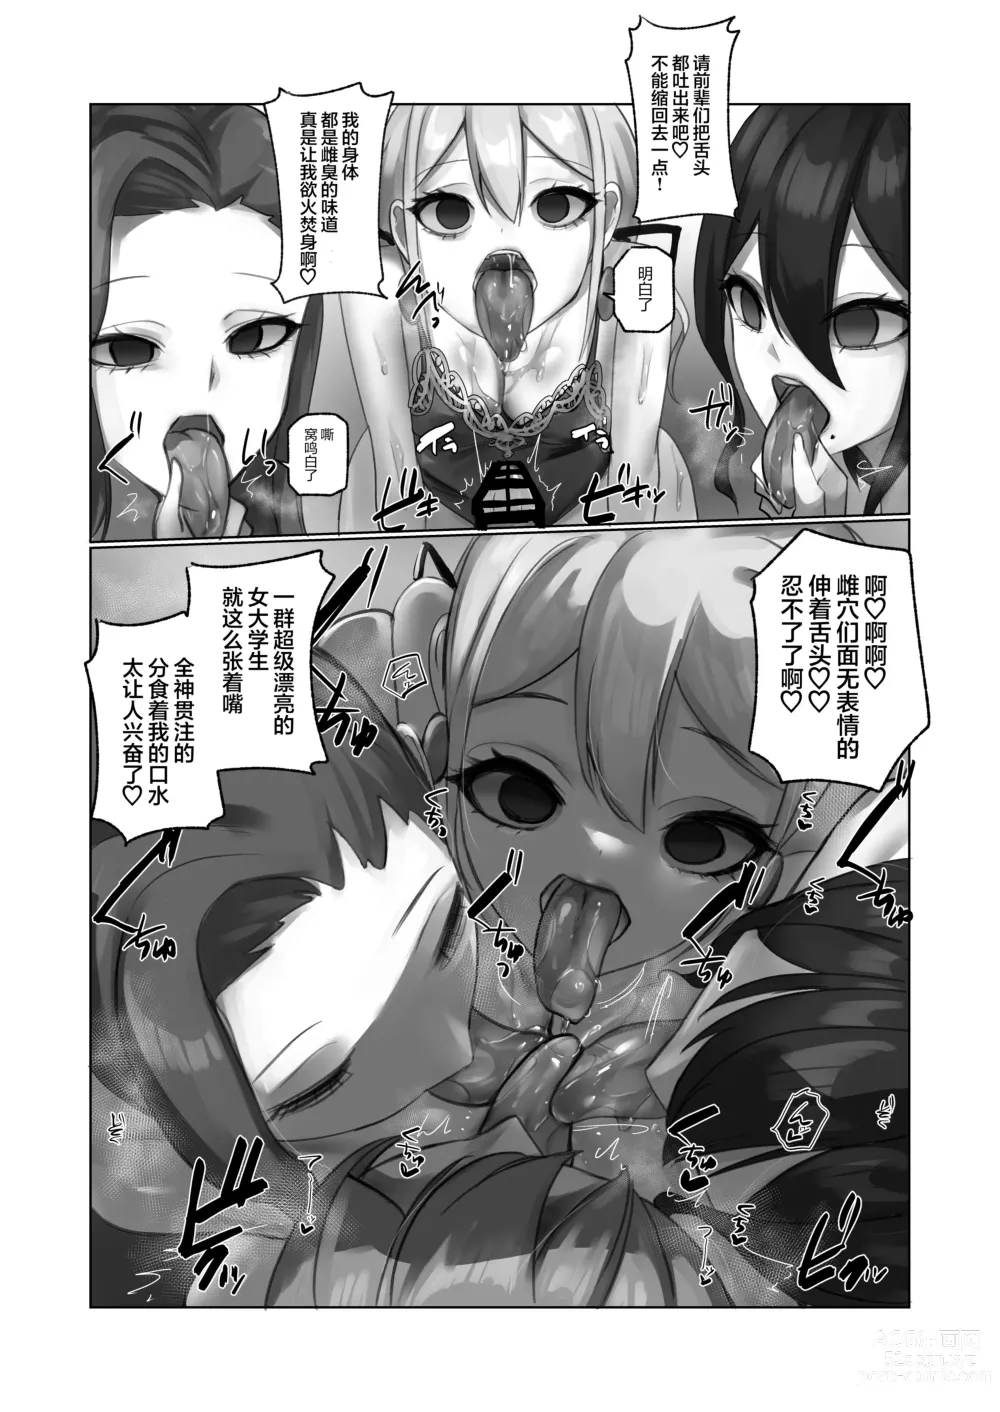 Page 33 of doujinshi Youkoso  Share House e